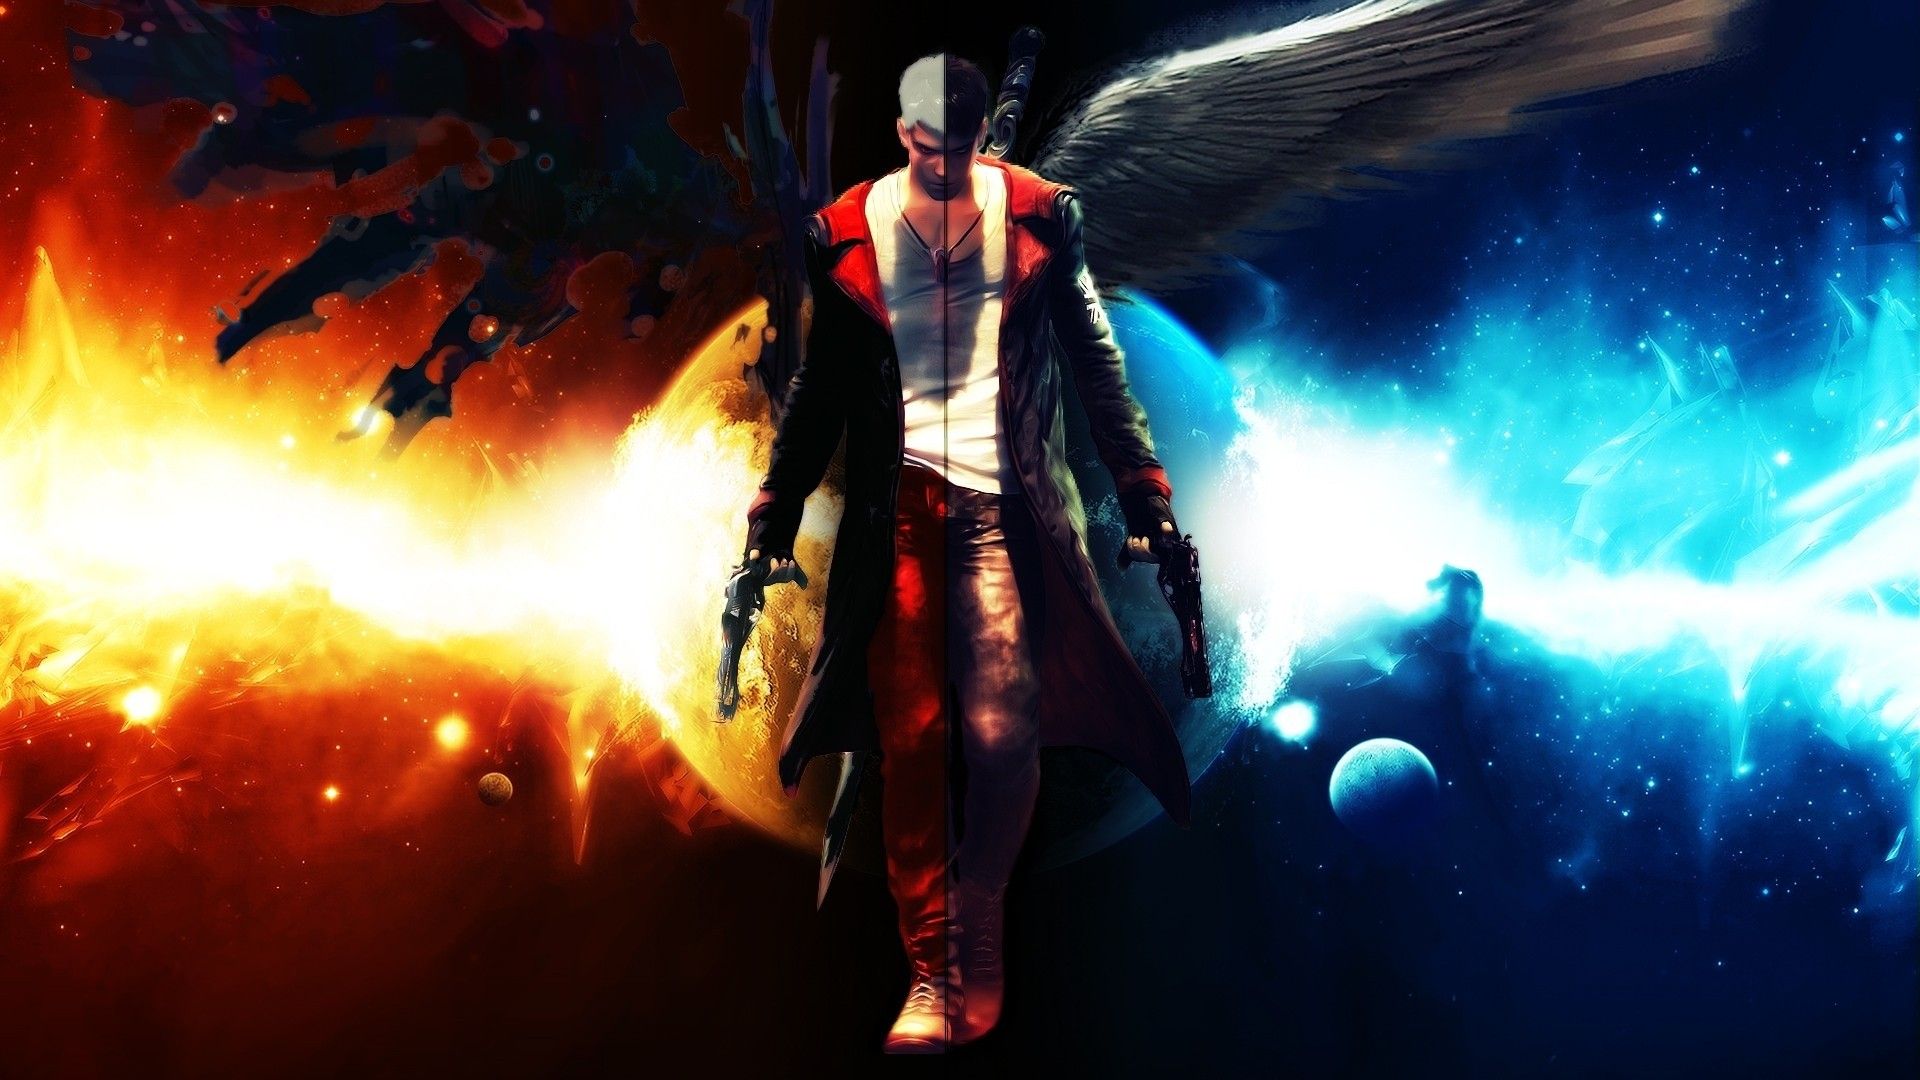 Wallpaper : Devil May Cry, Dante, darkness, screenshot, computer wallpaper,  special effects, pc game, action film, devil may cry 5 1920x1080 - wallup -  577579 - HD Wallpapers - WallHere